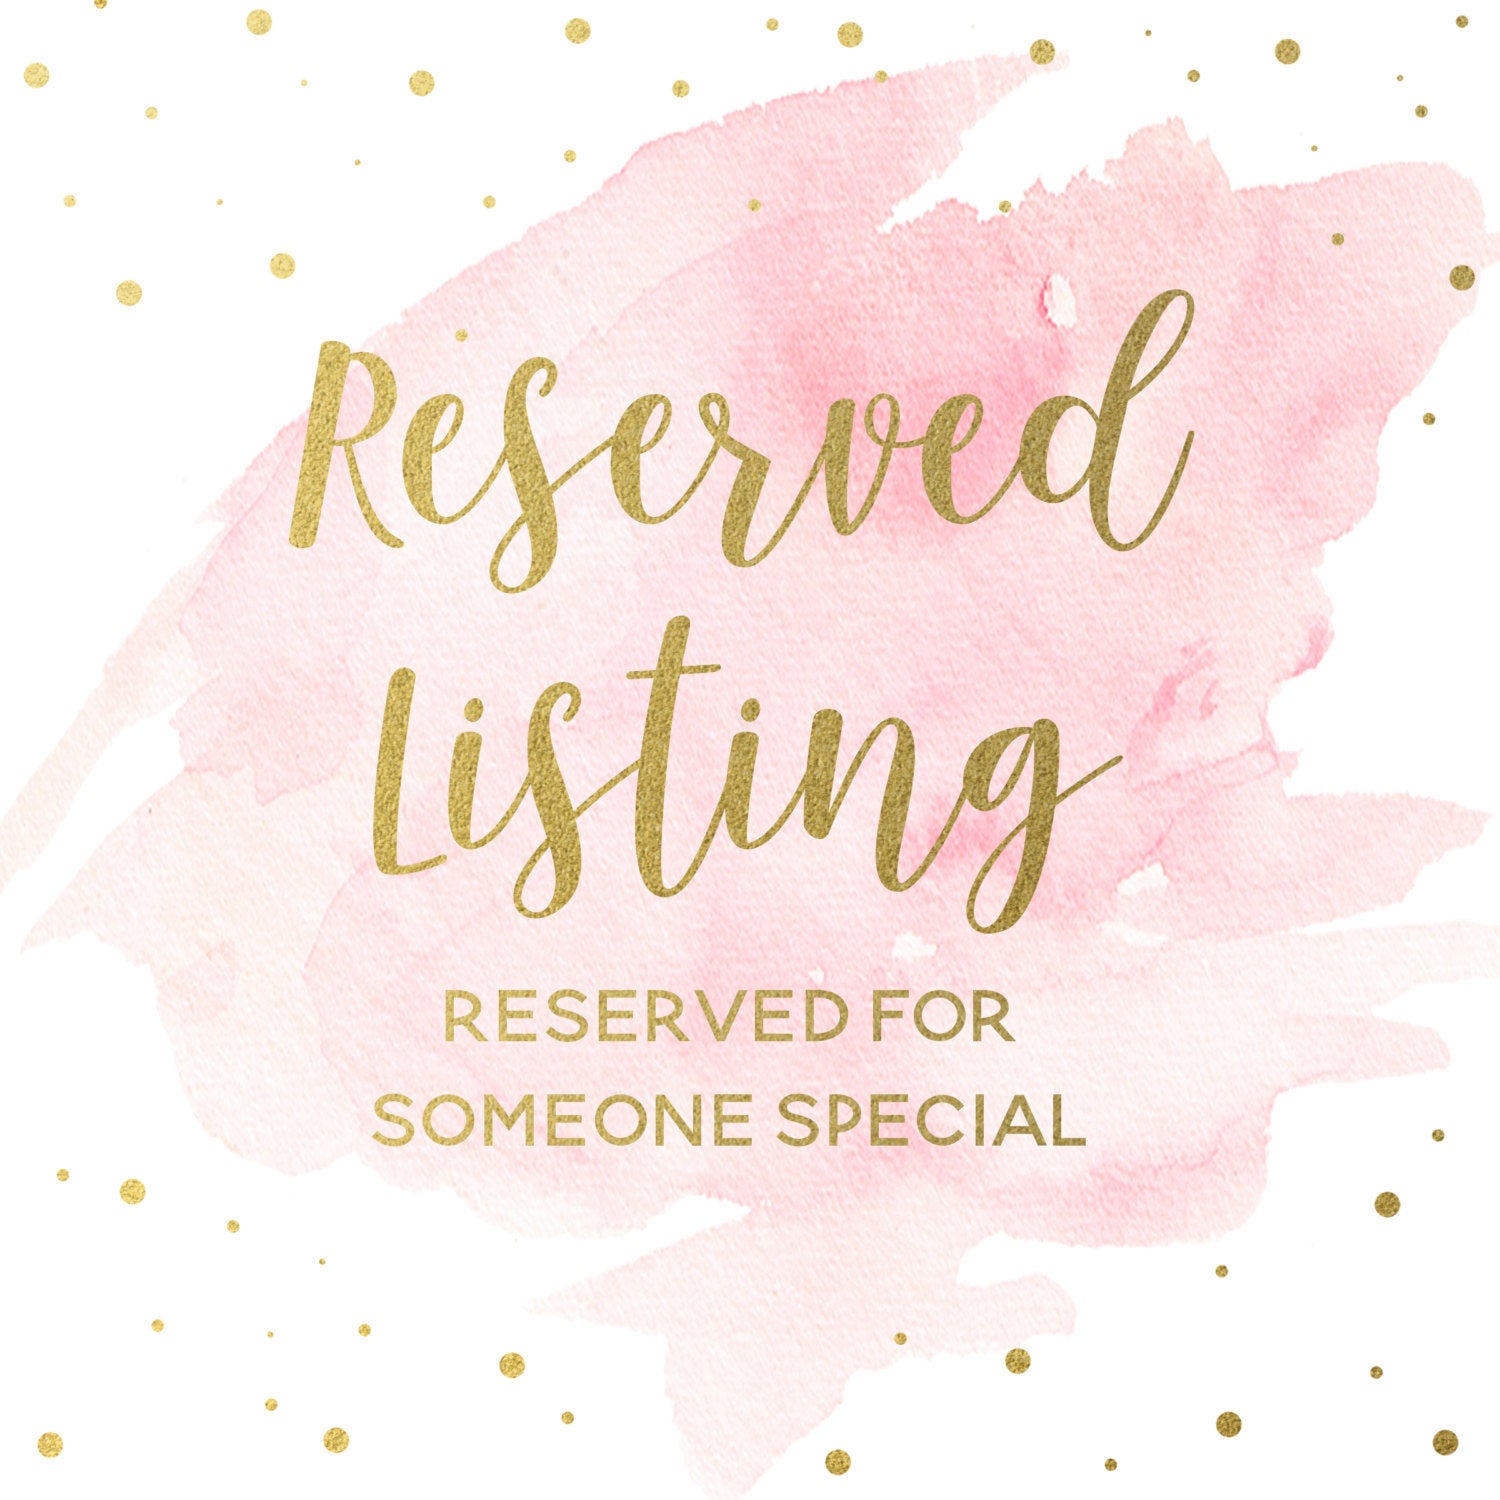 Reserved Listing - Lana A